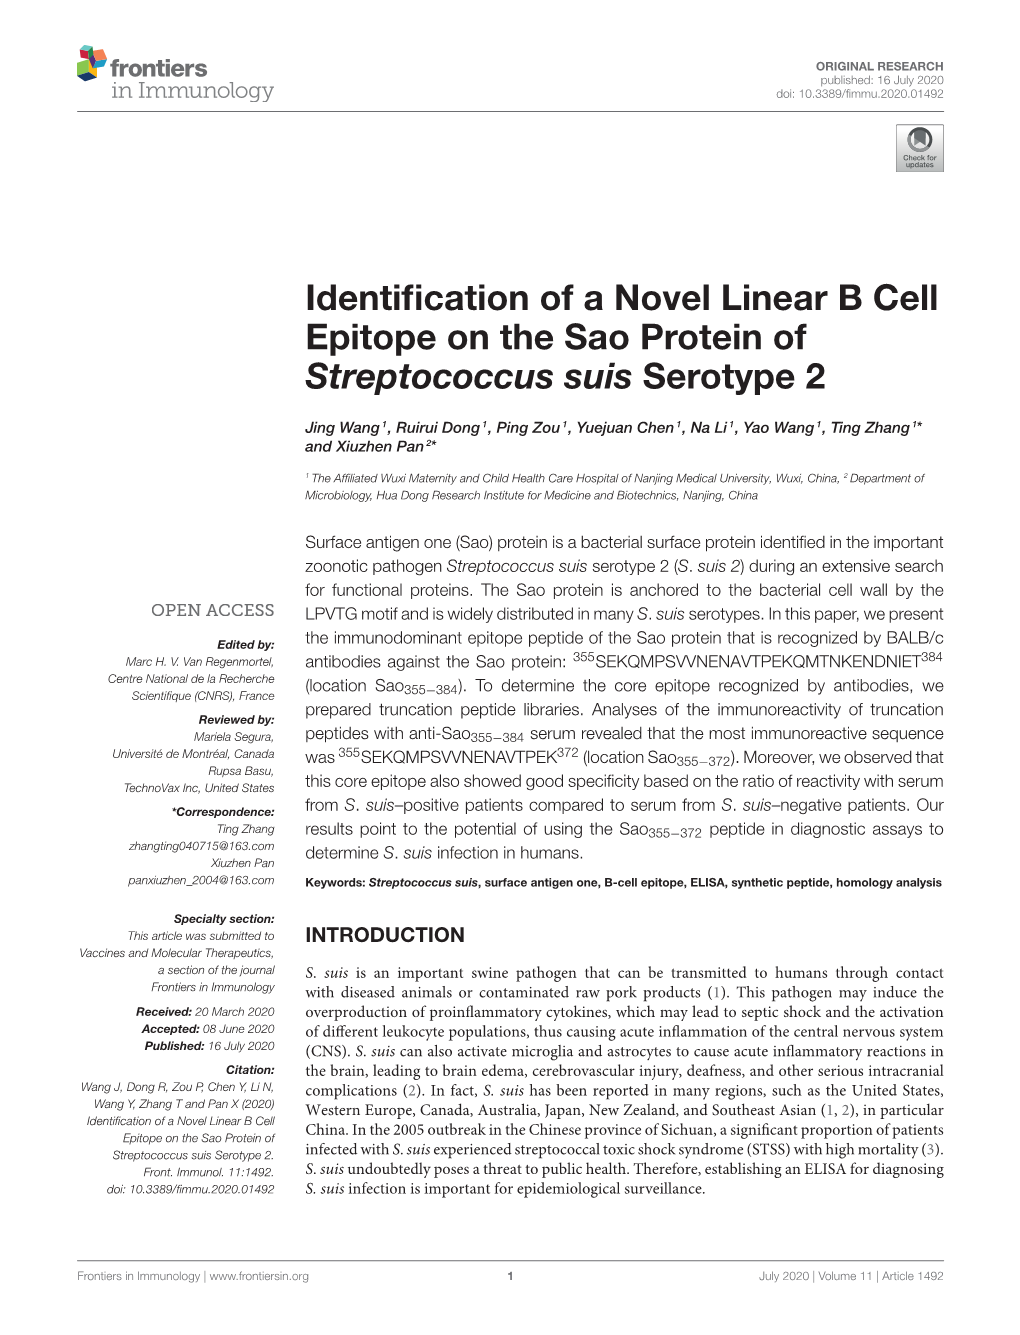 Identification of a Novel Linear B Cell Epitope on the Sao Protein Of